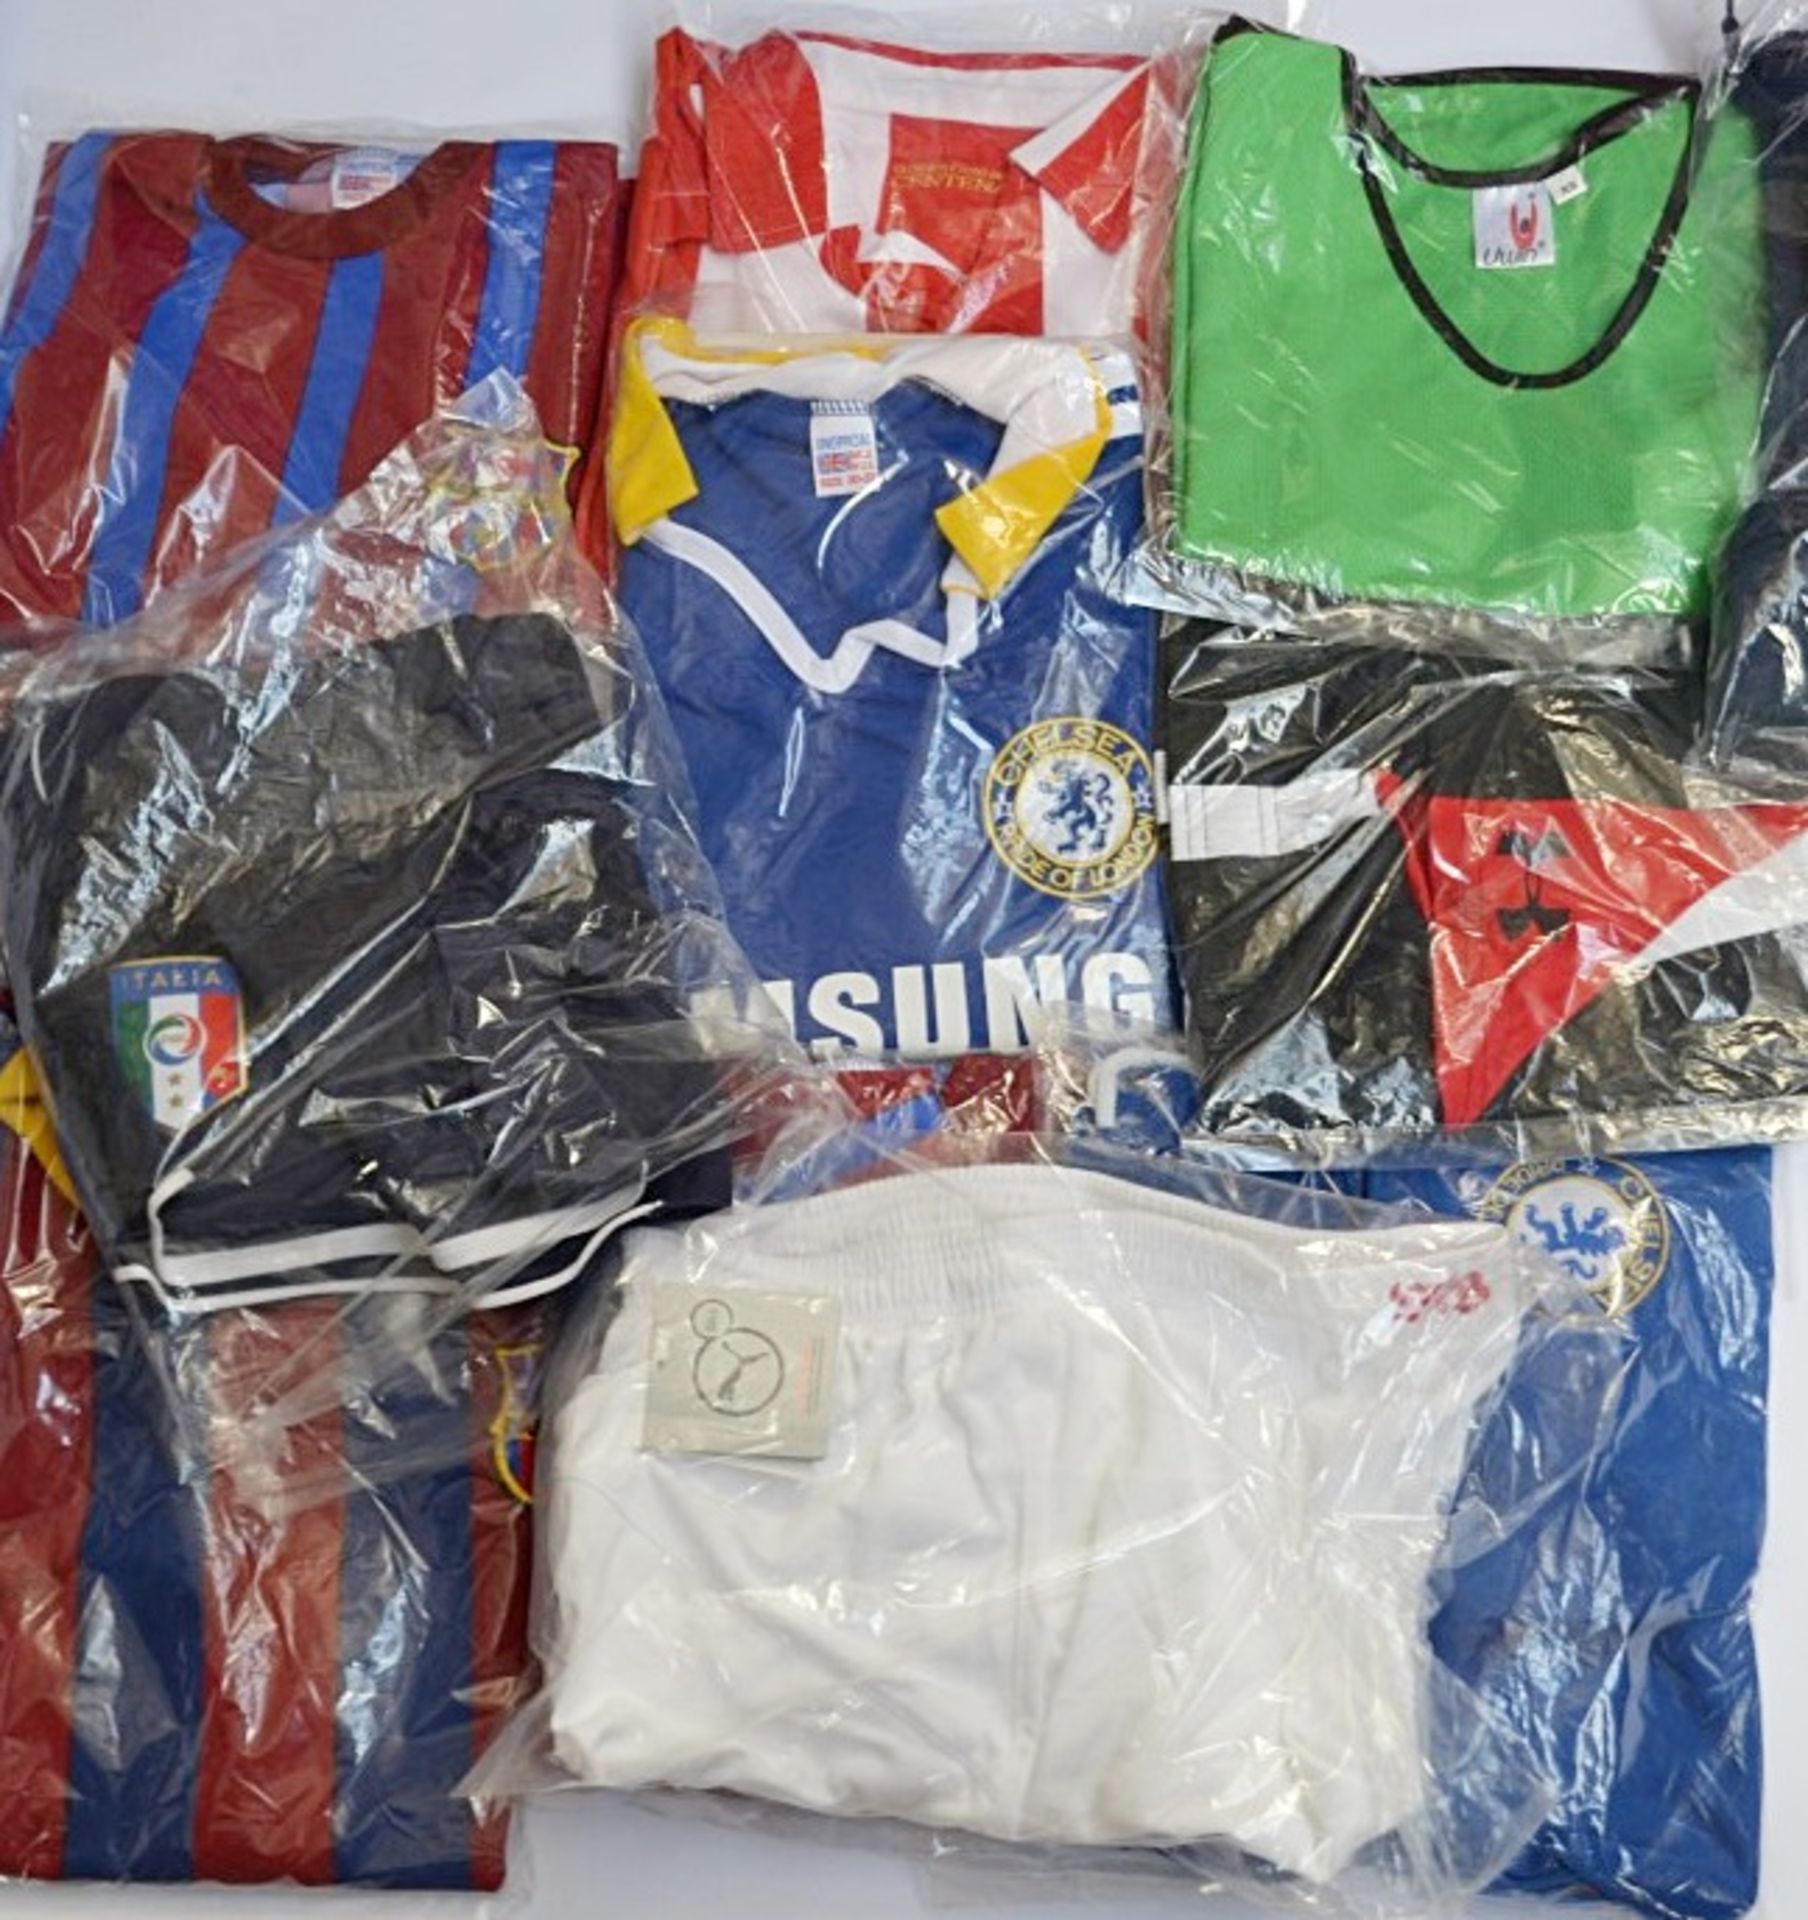 25 x Assorted Items Of Branded and Non-branded Sportswear Including Puma, Nike & Champion - Sizes: - Image 8 of 8